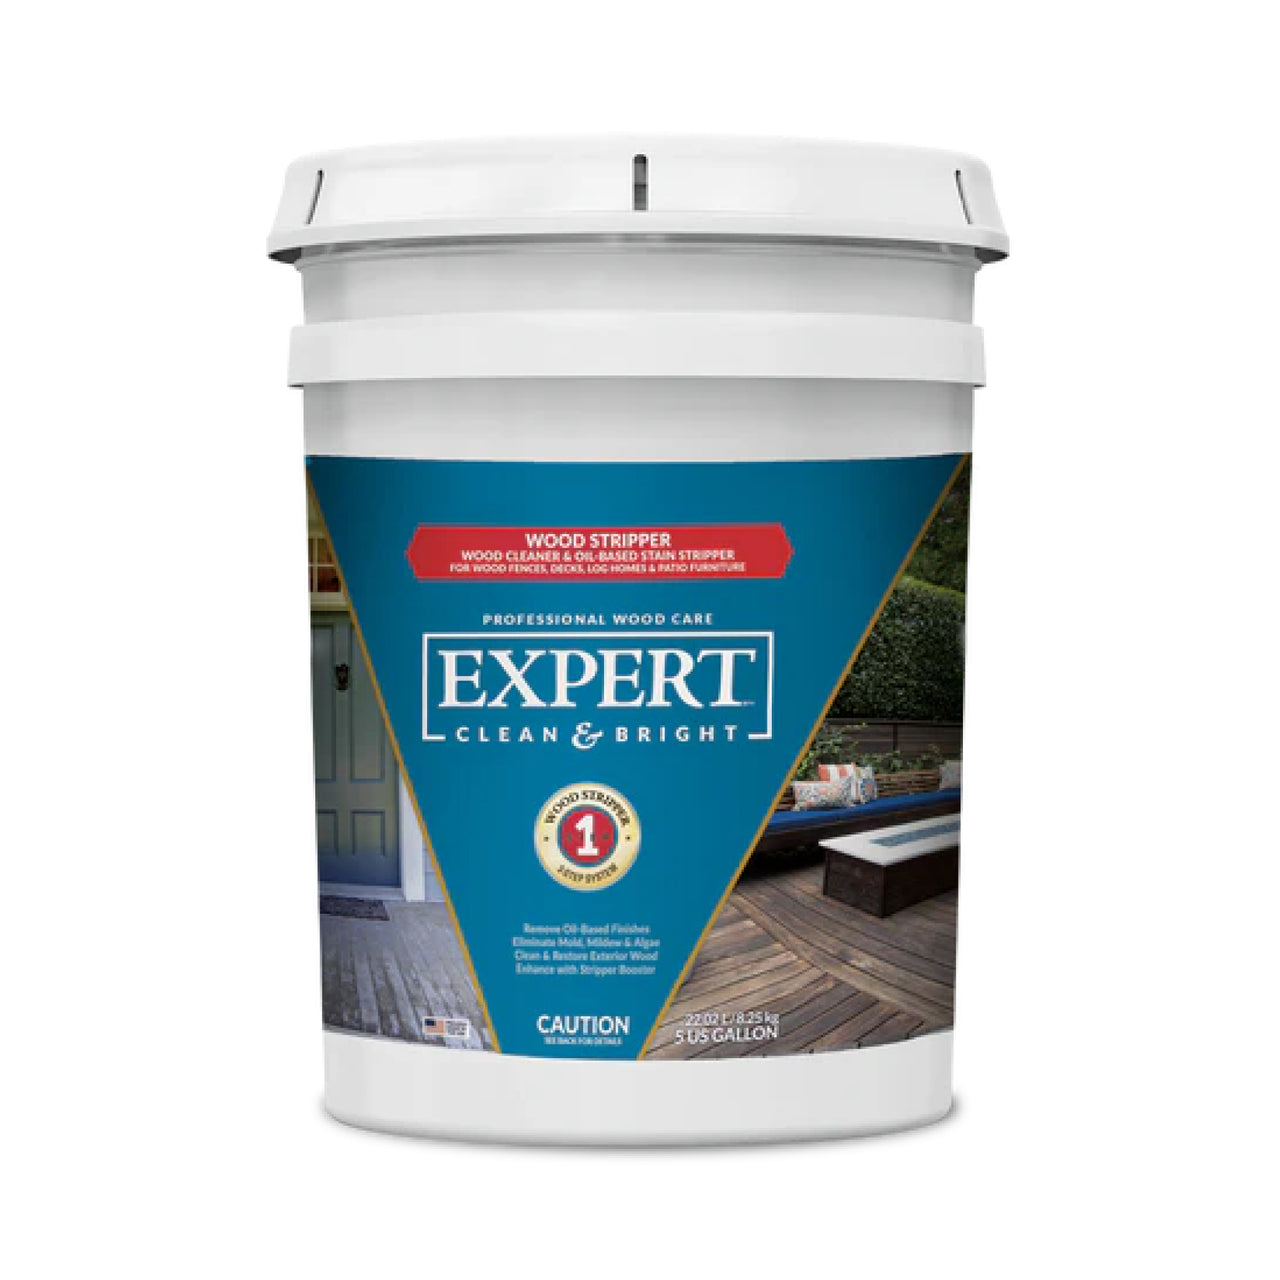 Expert Clean & Bright Wood Stripper: Deck Stain Remover 5 Gallons Paint Life Supply Co